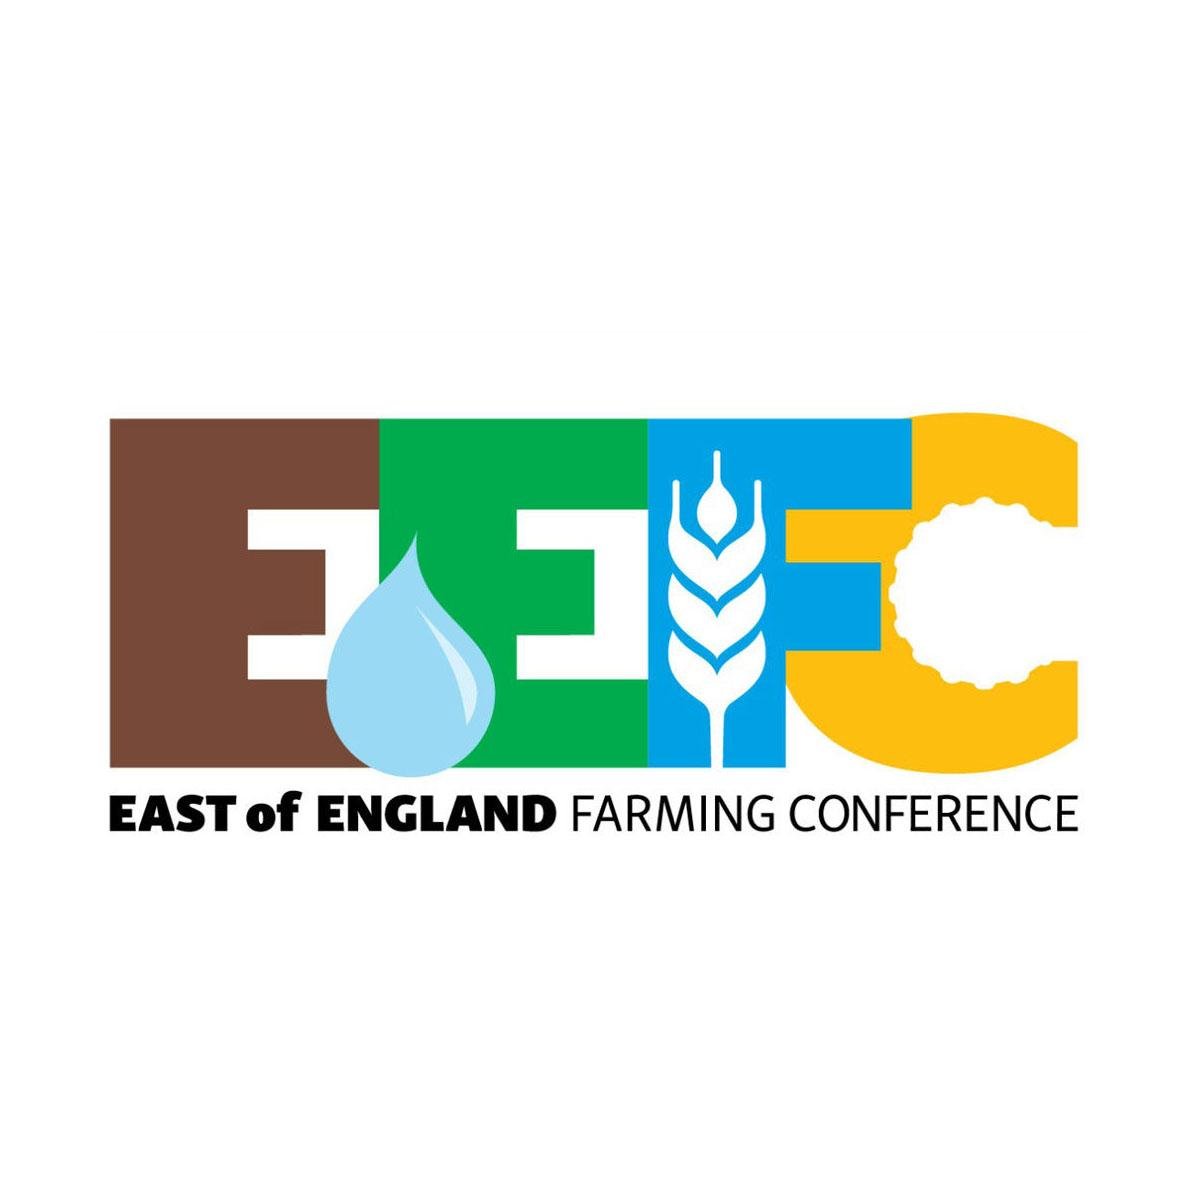 East of England Farming Conference